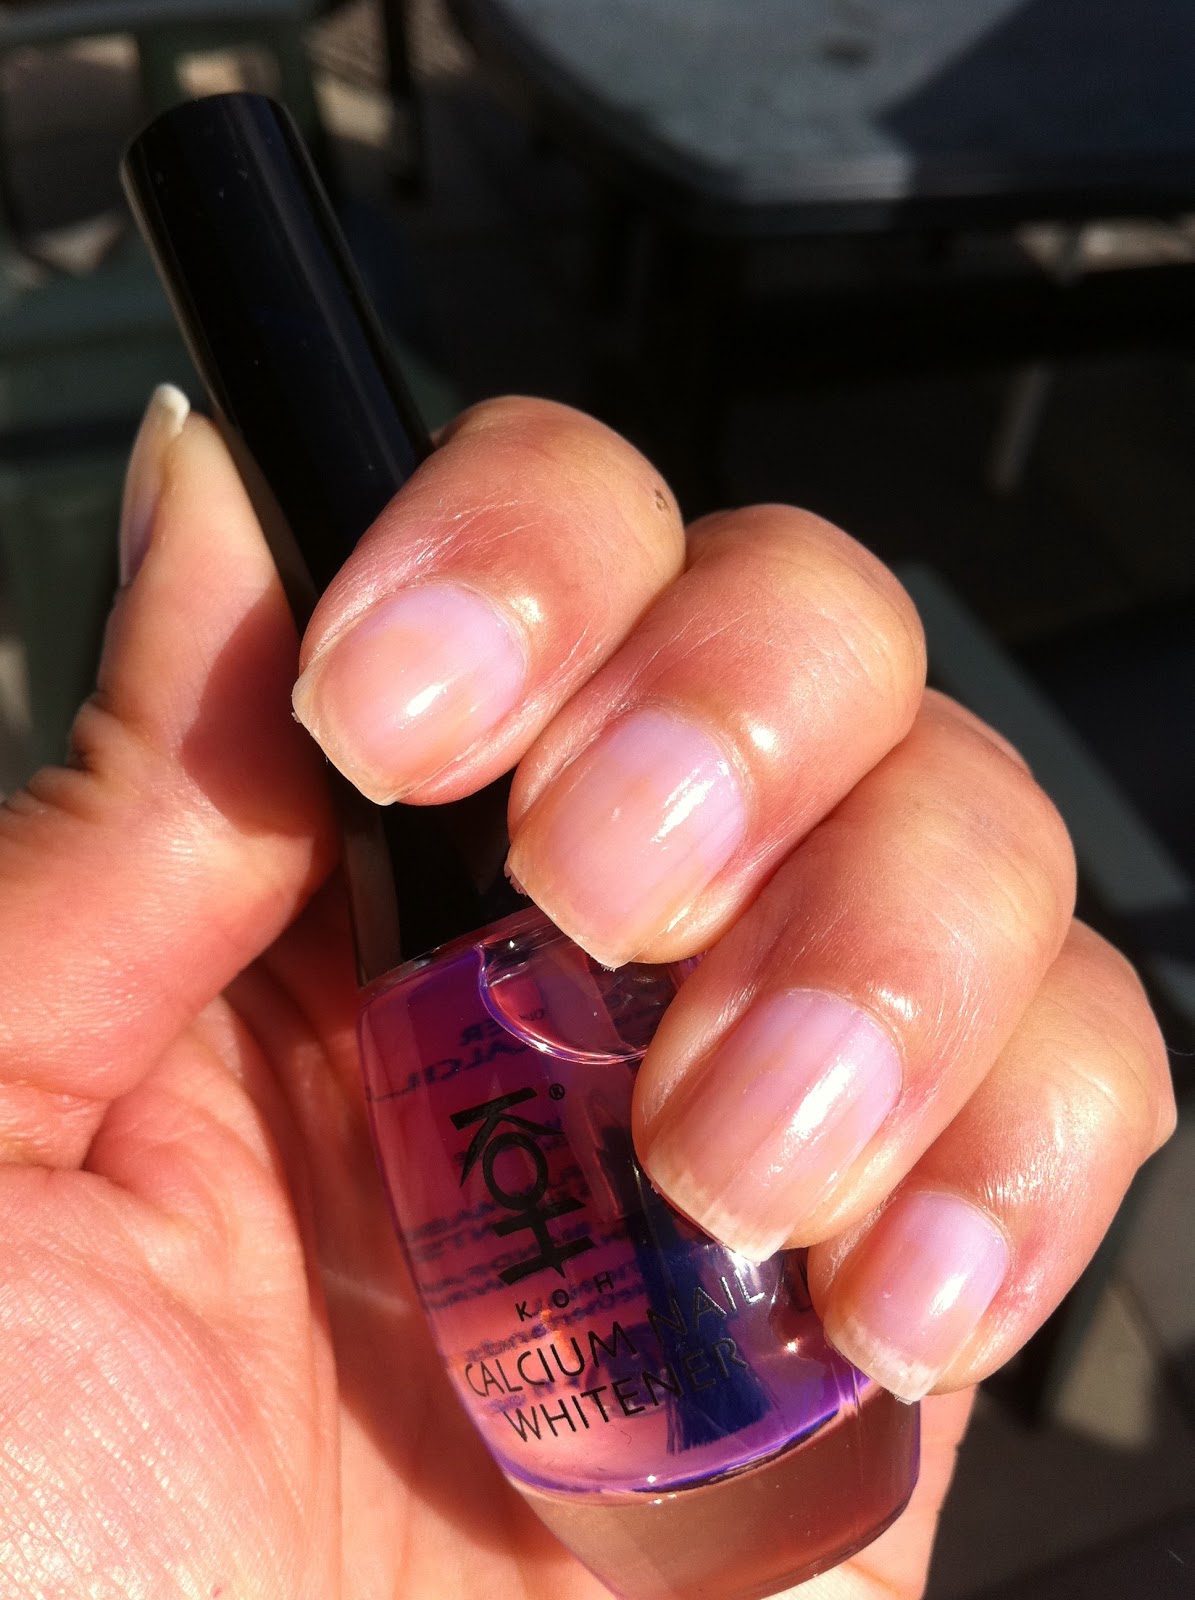 Triviaal Discriminerend opslag BeautyTalkNL: Nails of the Week: KOH Calcium Nail Whitener